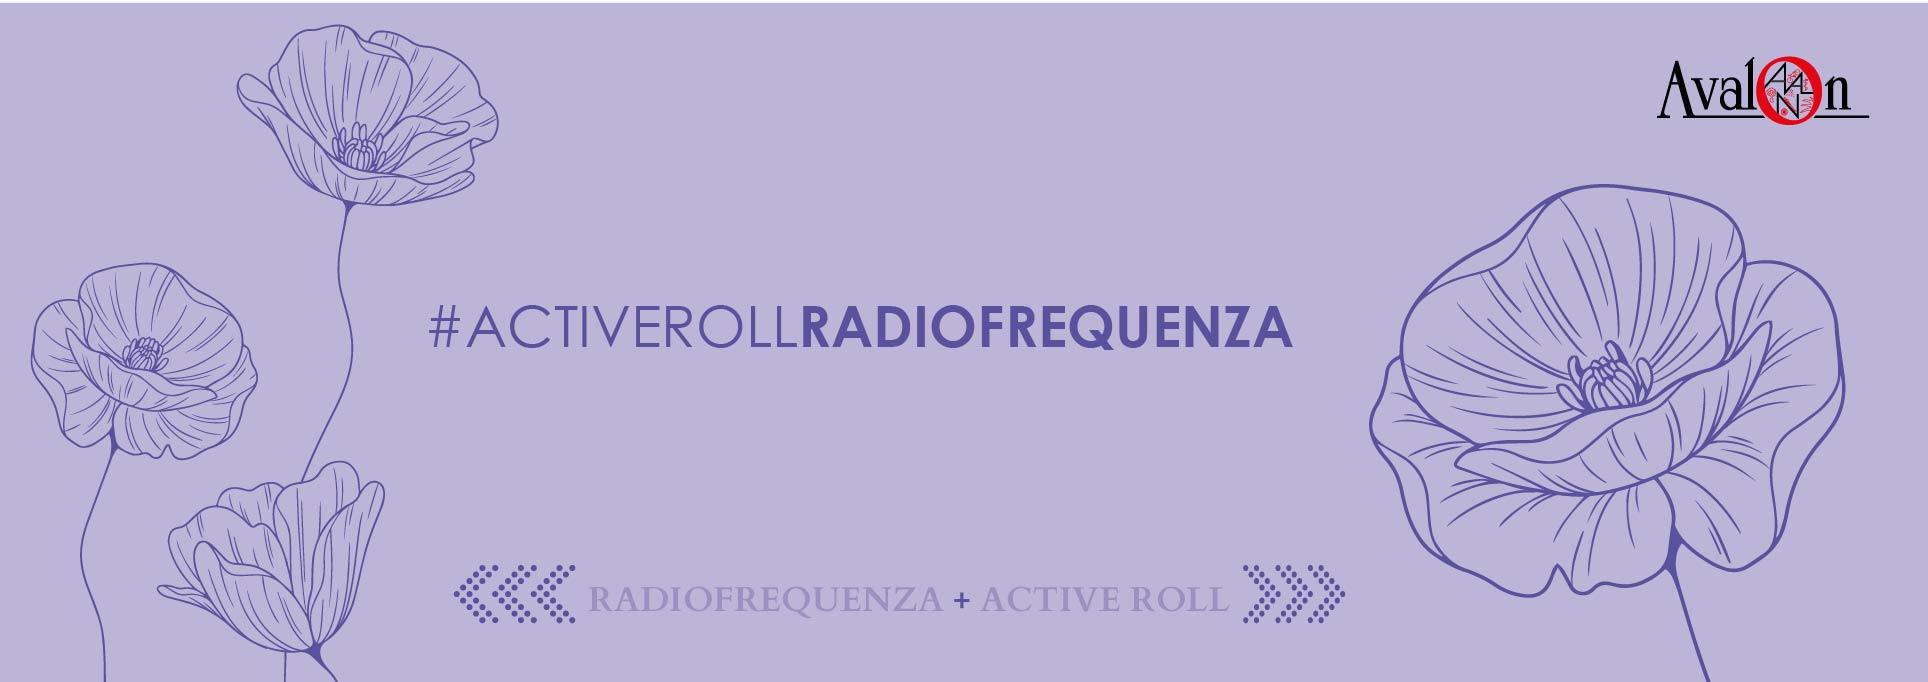 COMBO: RADIOFREQUENZA + ACTIVE ROLL!